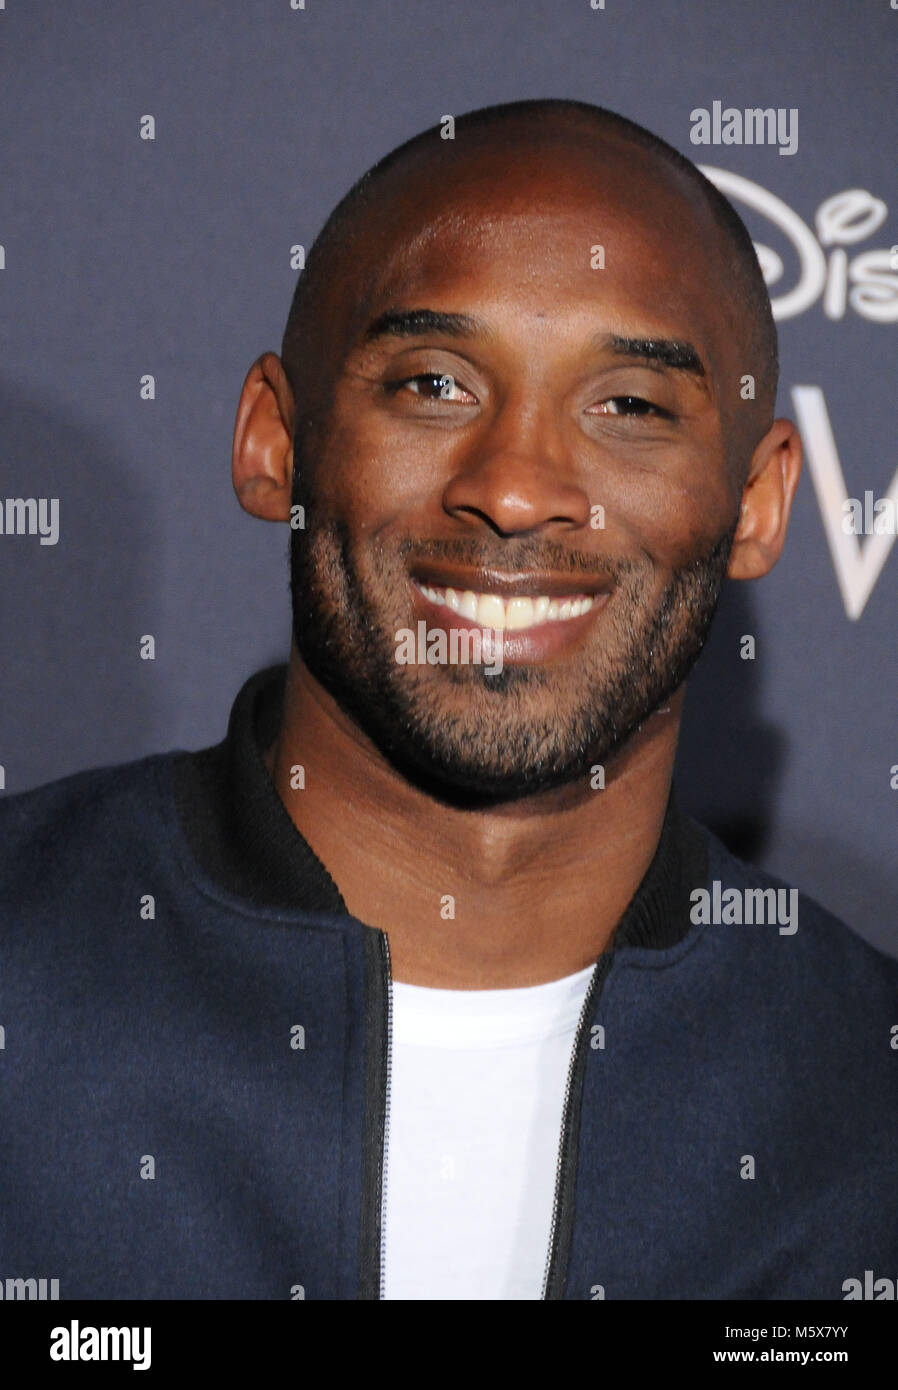 Los Angeles, USA. 26th Feb, 2018. Kobe Bryant attends the World Premiere of Disney's' 'A Wrinkle In Time' at the El Capitan Theatre on February 26, 2018 in Los Angeles, California. Photo by Barry King/Alamy Live News Stock Photo